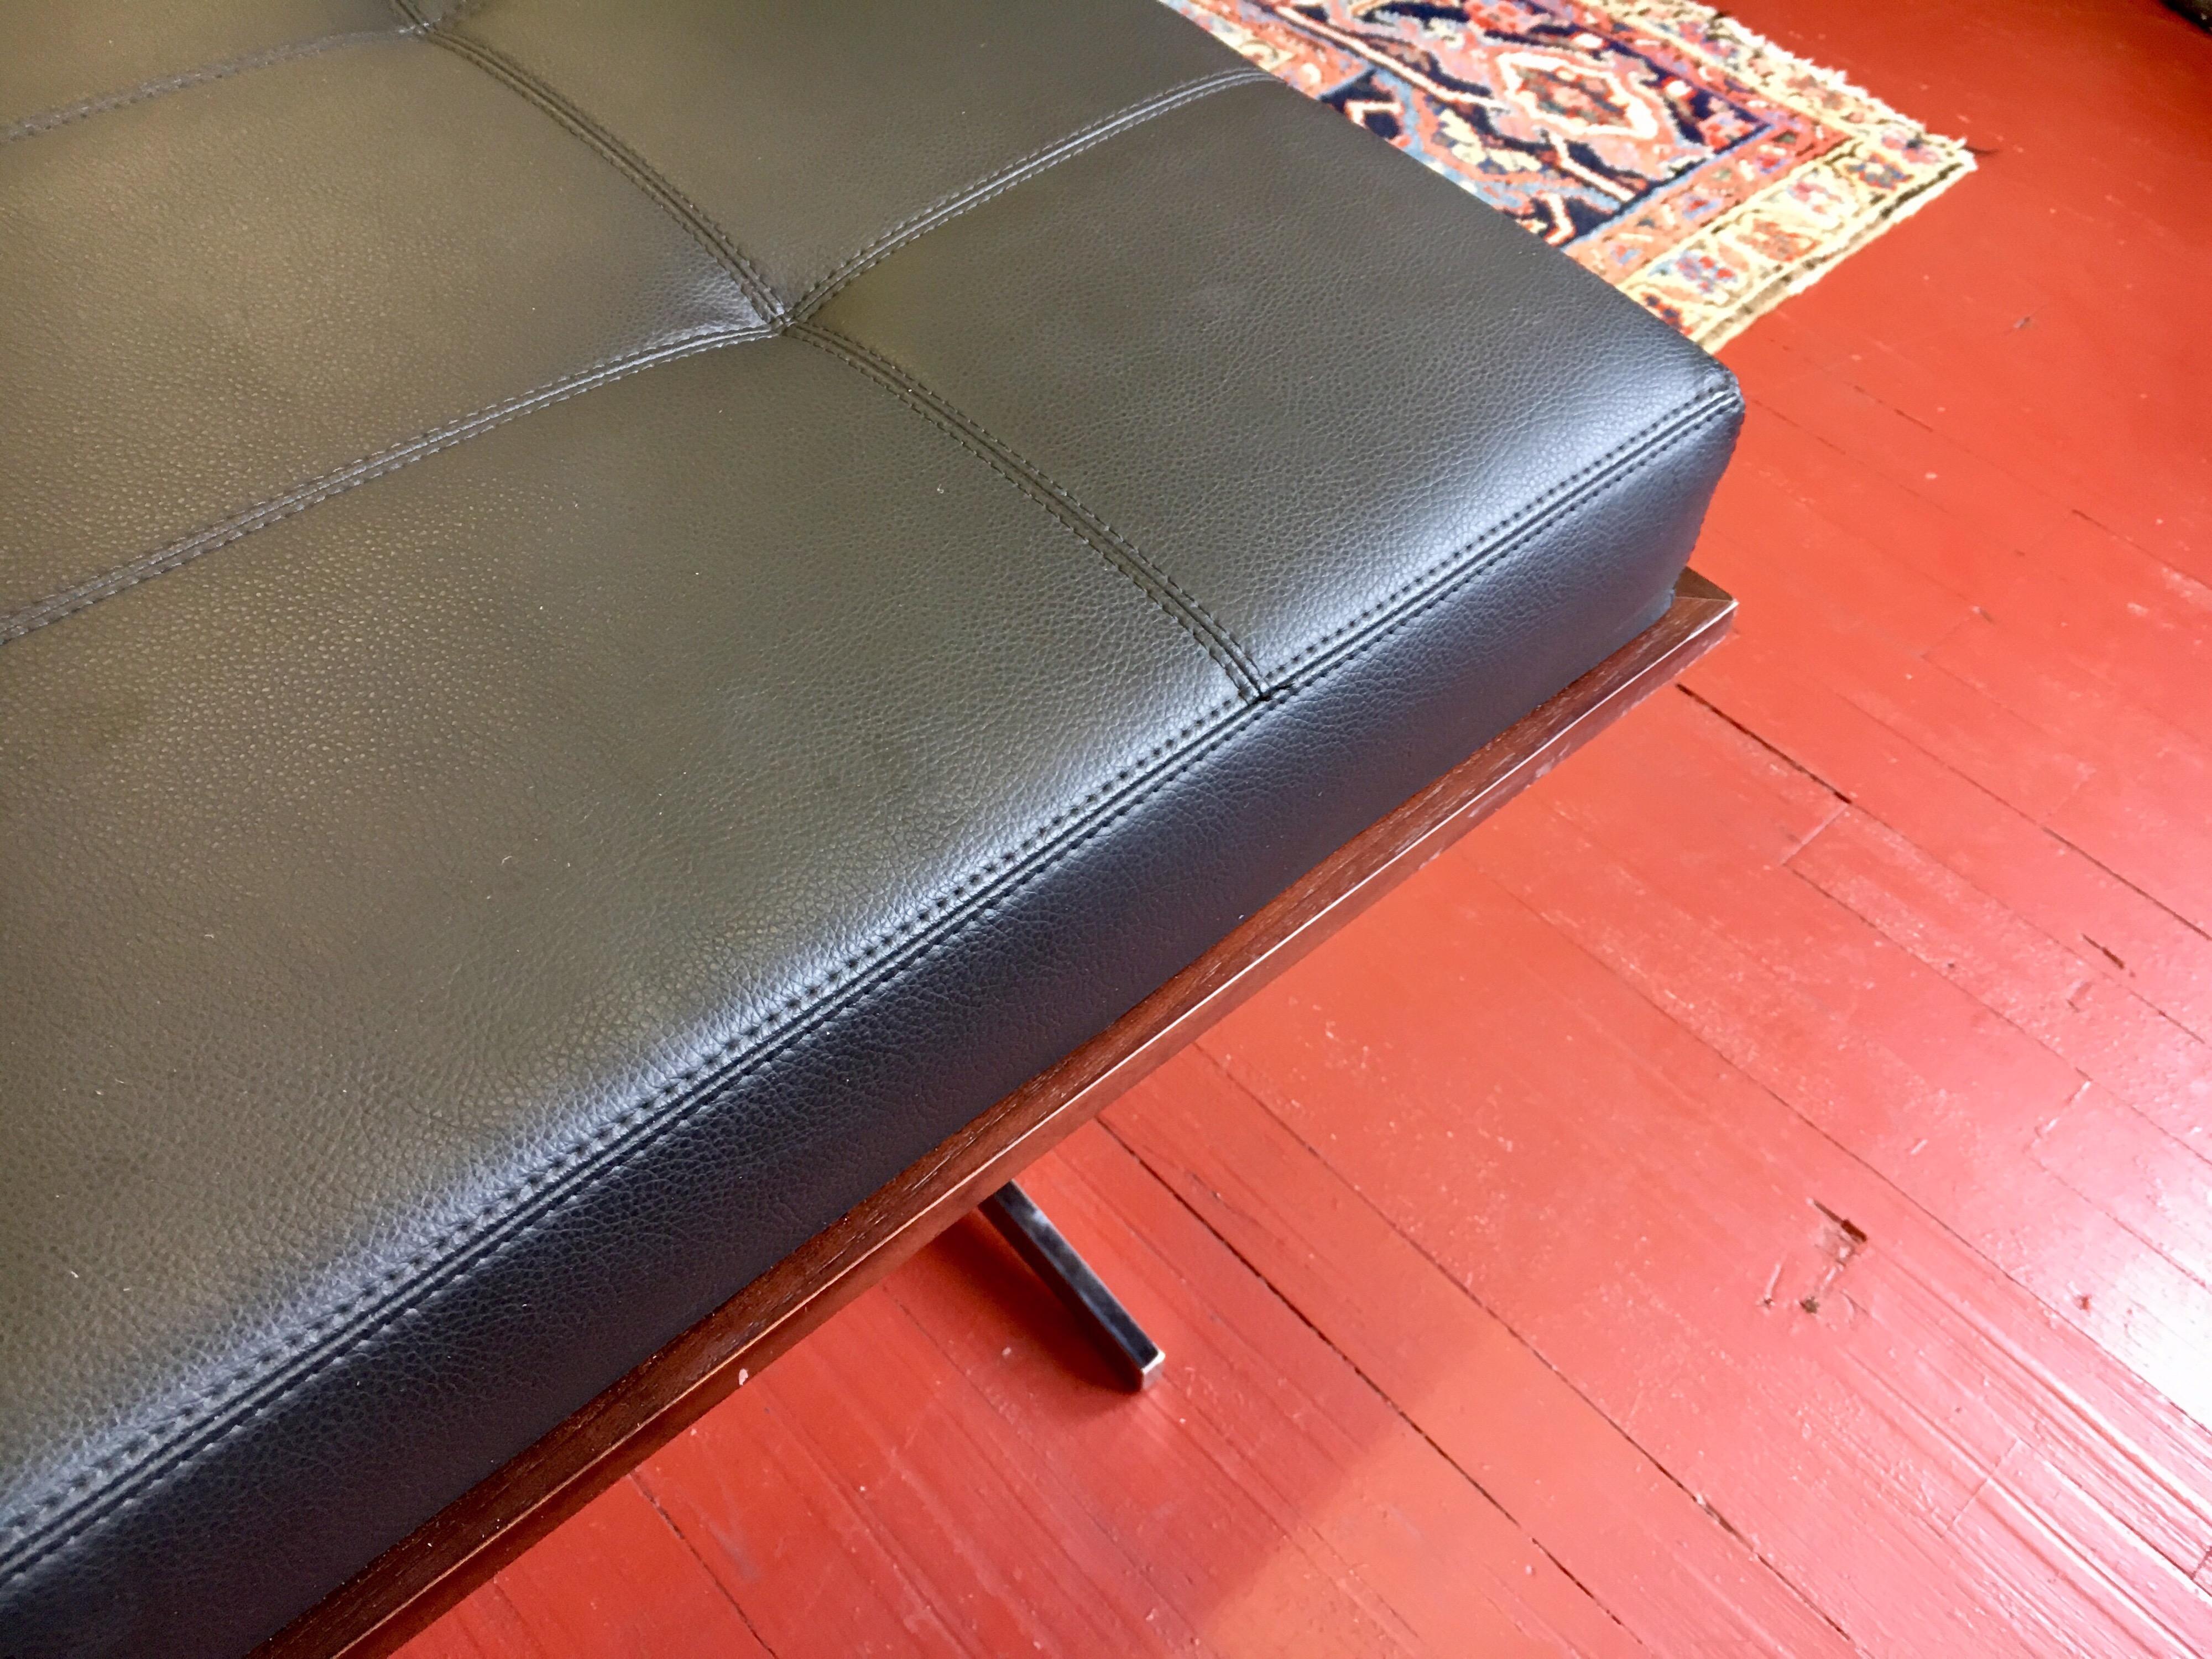 Bernhardt Black Leather and Mahogany Chaise Lounge Settee Lounger Daybed (amerikanisch)